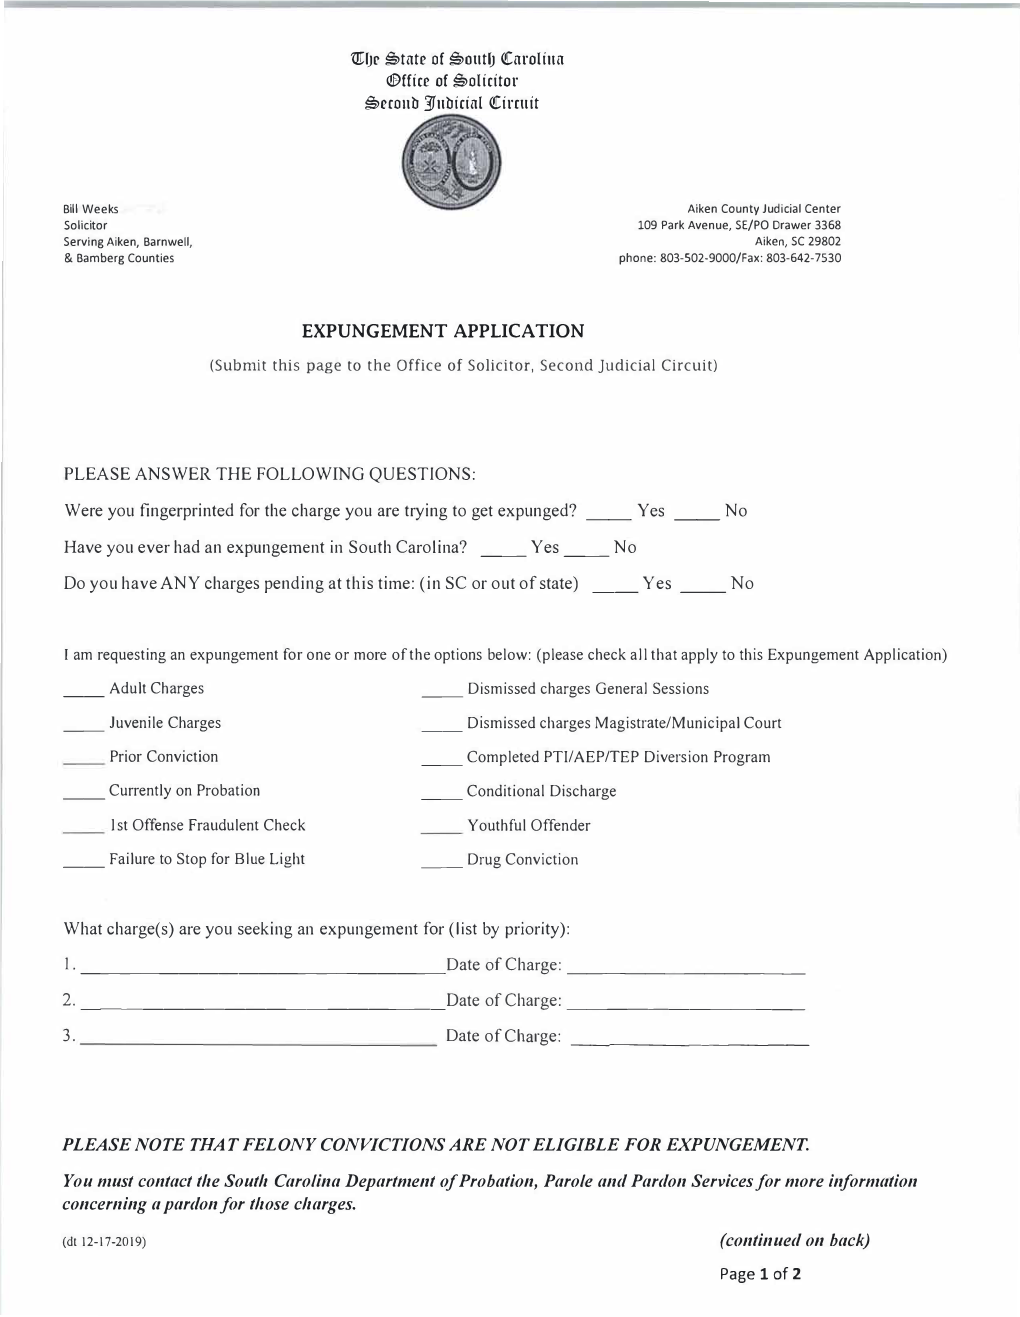 EXPUNGEMENT APPLICATION (Submit This Page to the Office of Solicitor, Second Judicial Circuit)